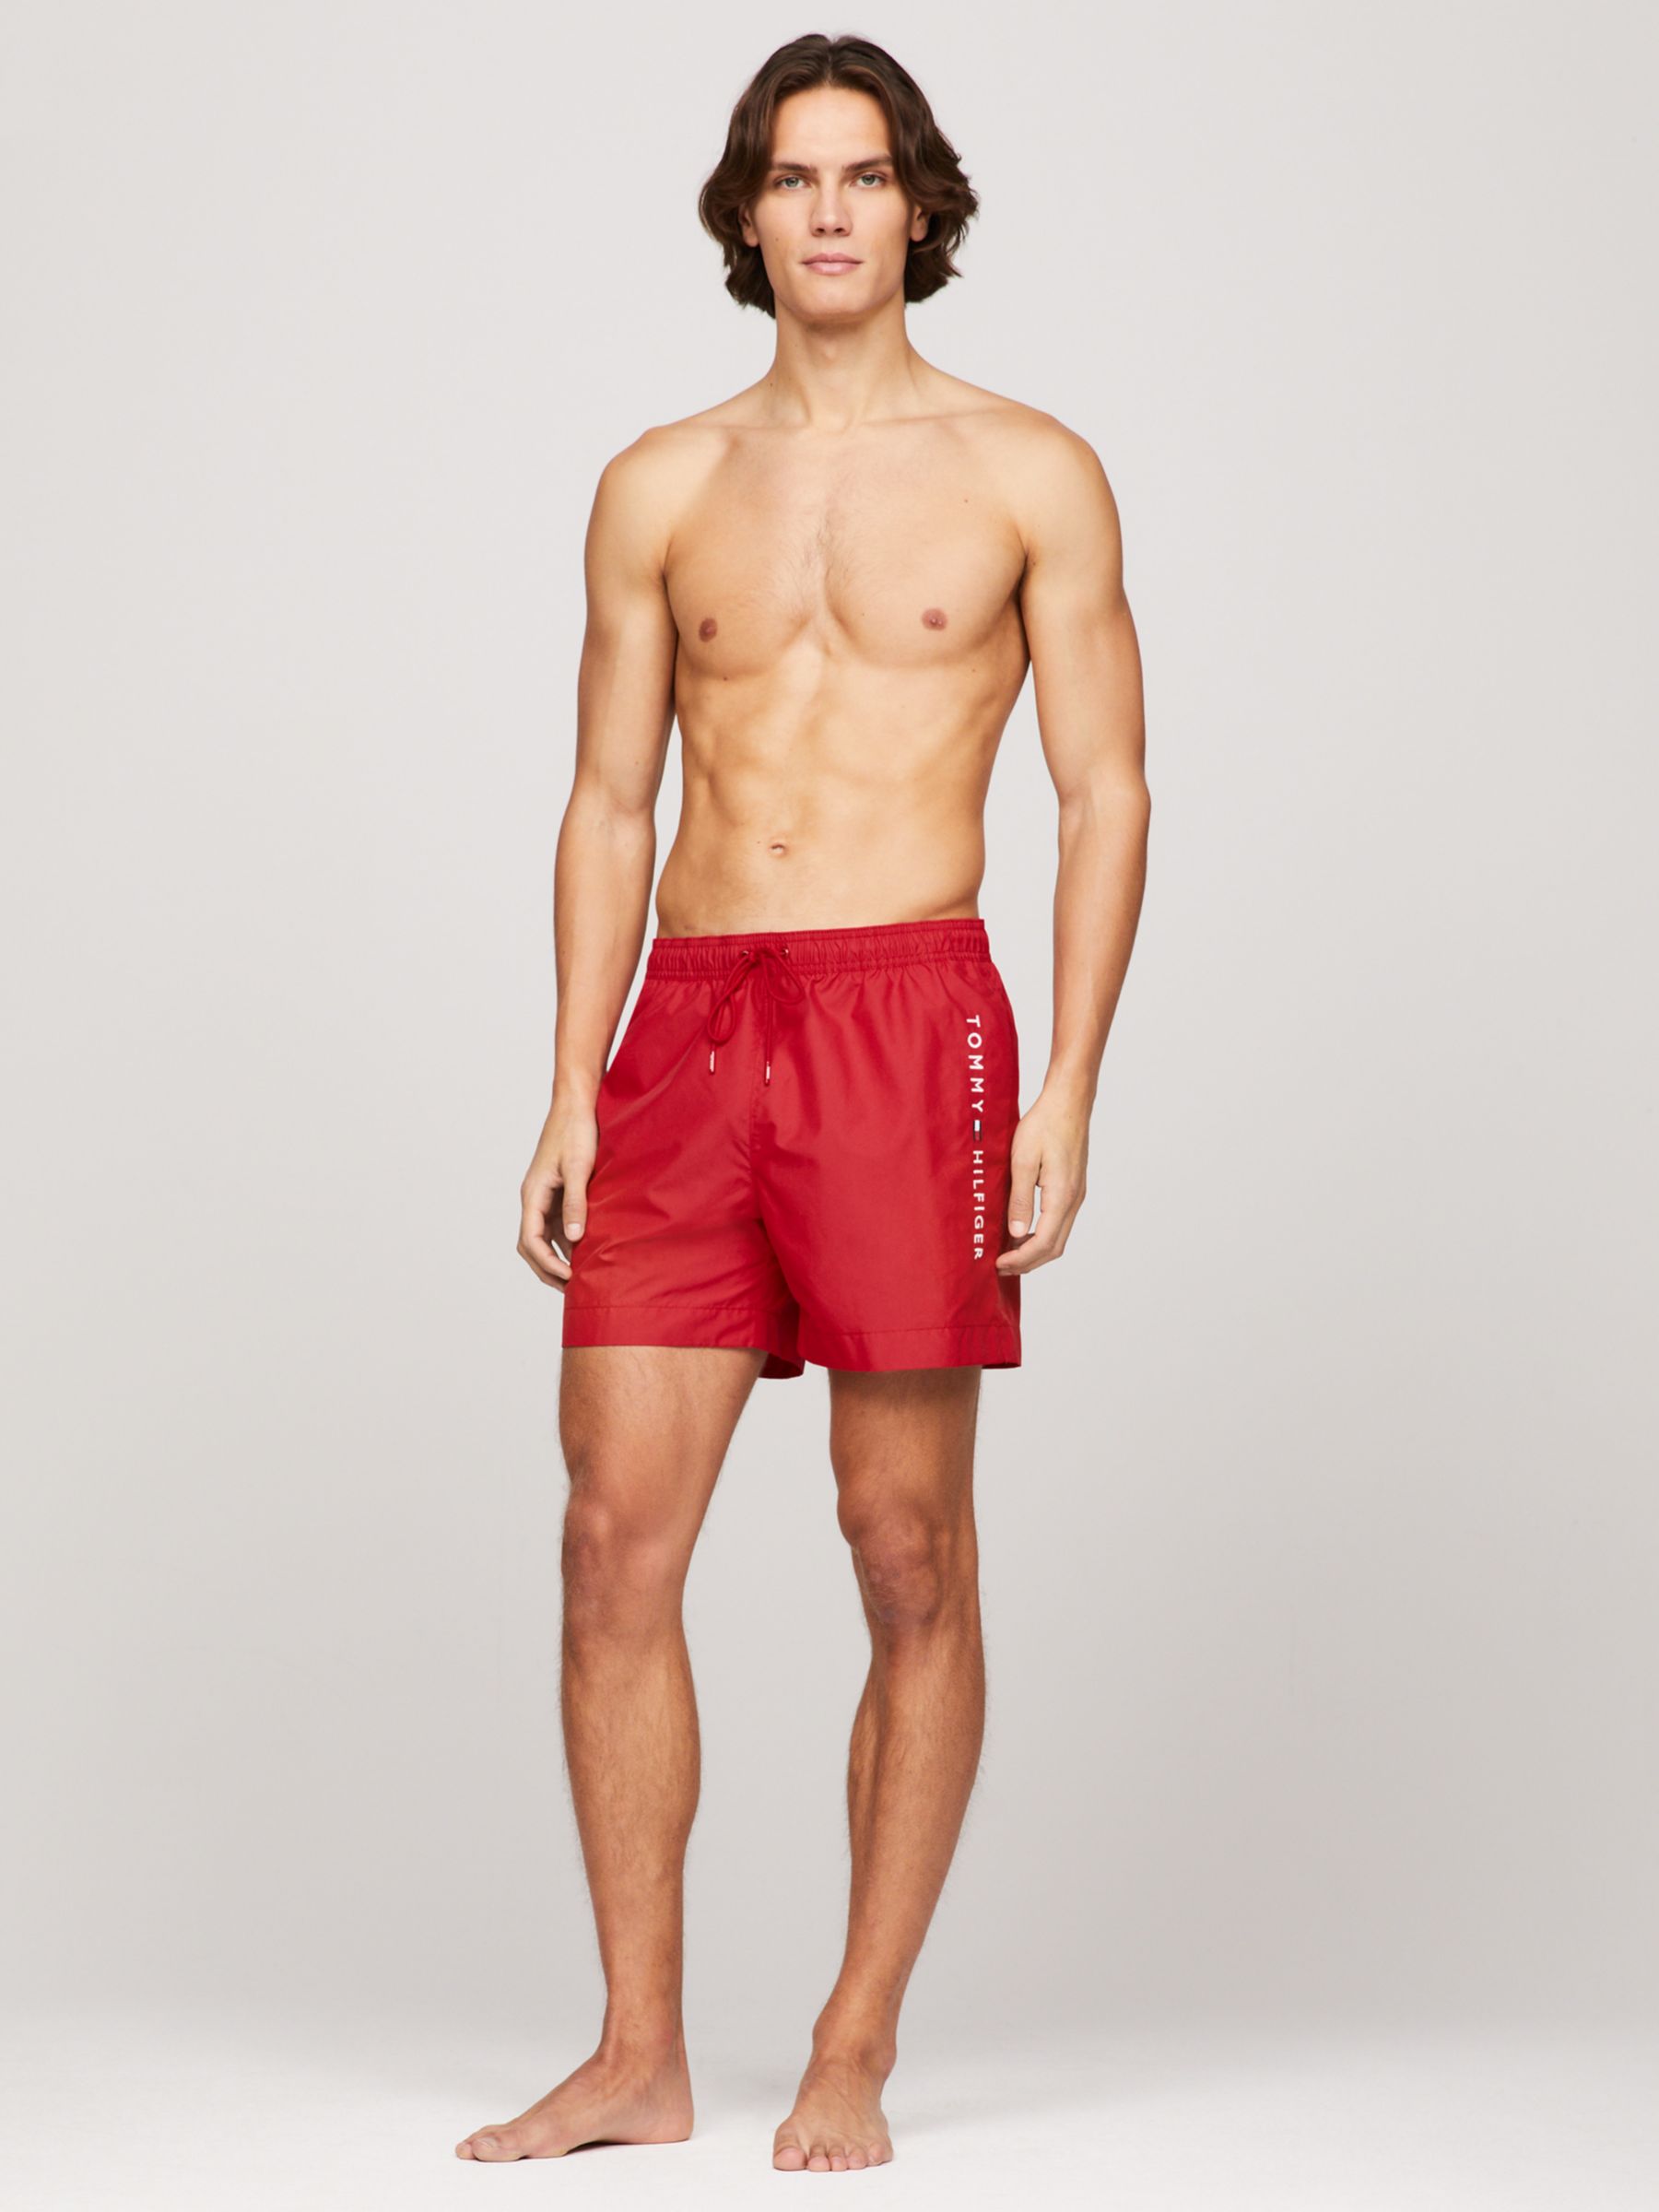 Tommy Hilfiger Side Print Swim Shorts, Primary Red, S